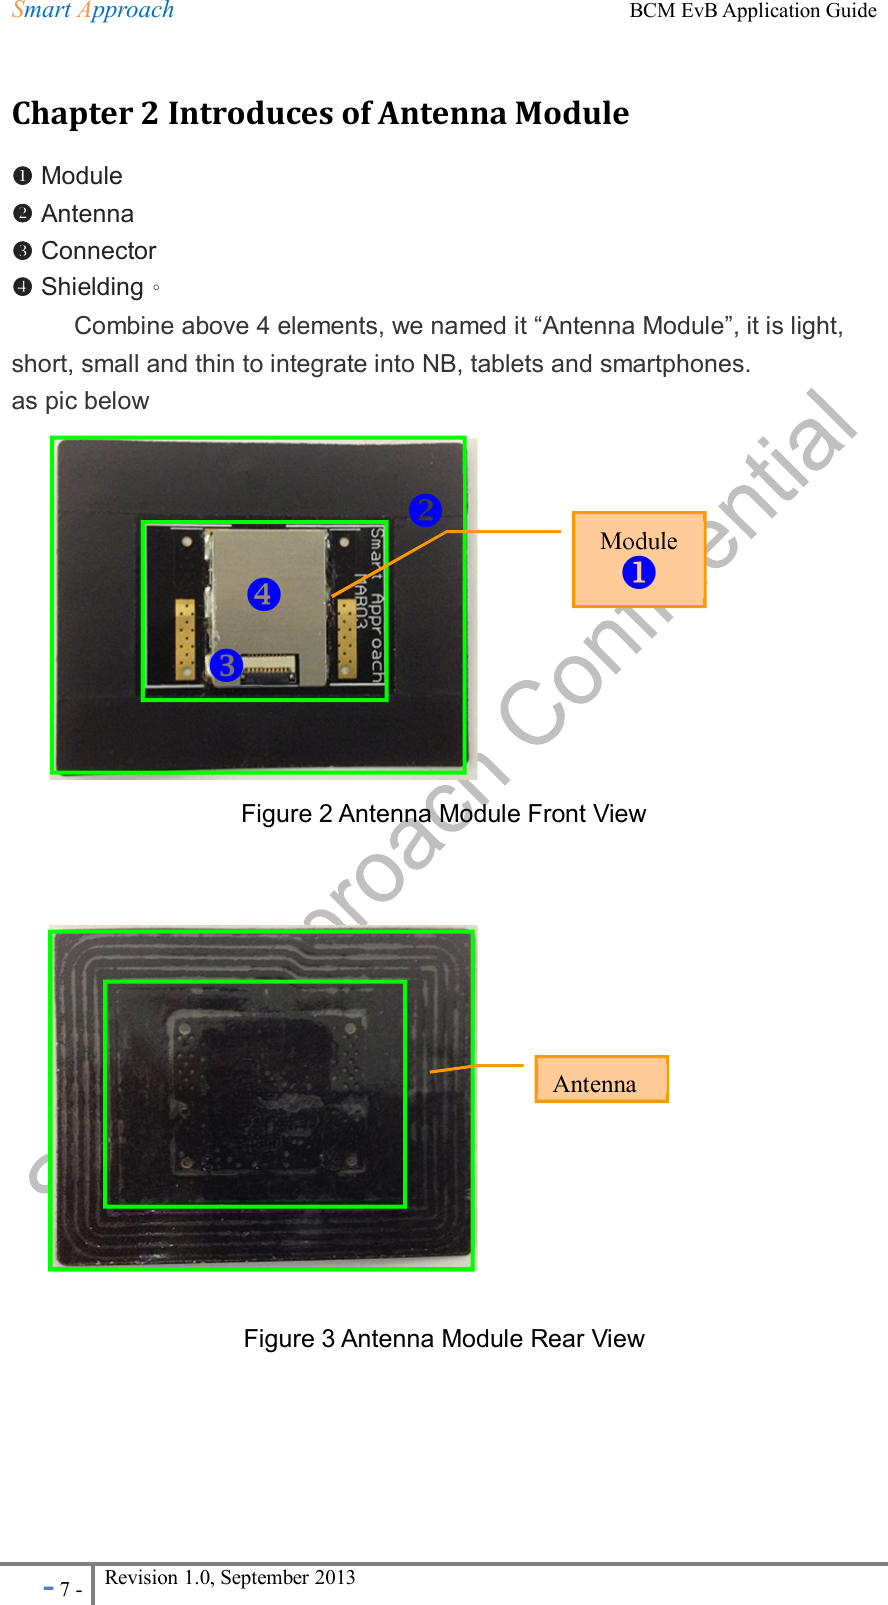 Smart Approach    BCM EvB Application Guide - 7 - Revision 1.0, September 2013                                                             Chapter 2 Introduces of Antenna Module  Module  Antenna  Connector  Shielding。 Combine above 4 elements, we named it “Antenna Module”, it is light, short, small and thin to integrate into NB, tablets and smartphones. as pic below           Figure 2 Antenna Module Front View              Figure 3 Antenna Module Rear View    Antenna   Module    